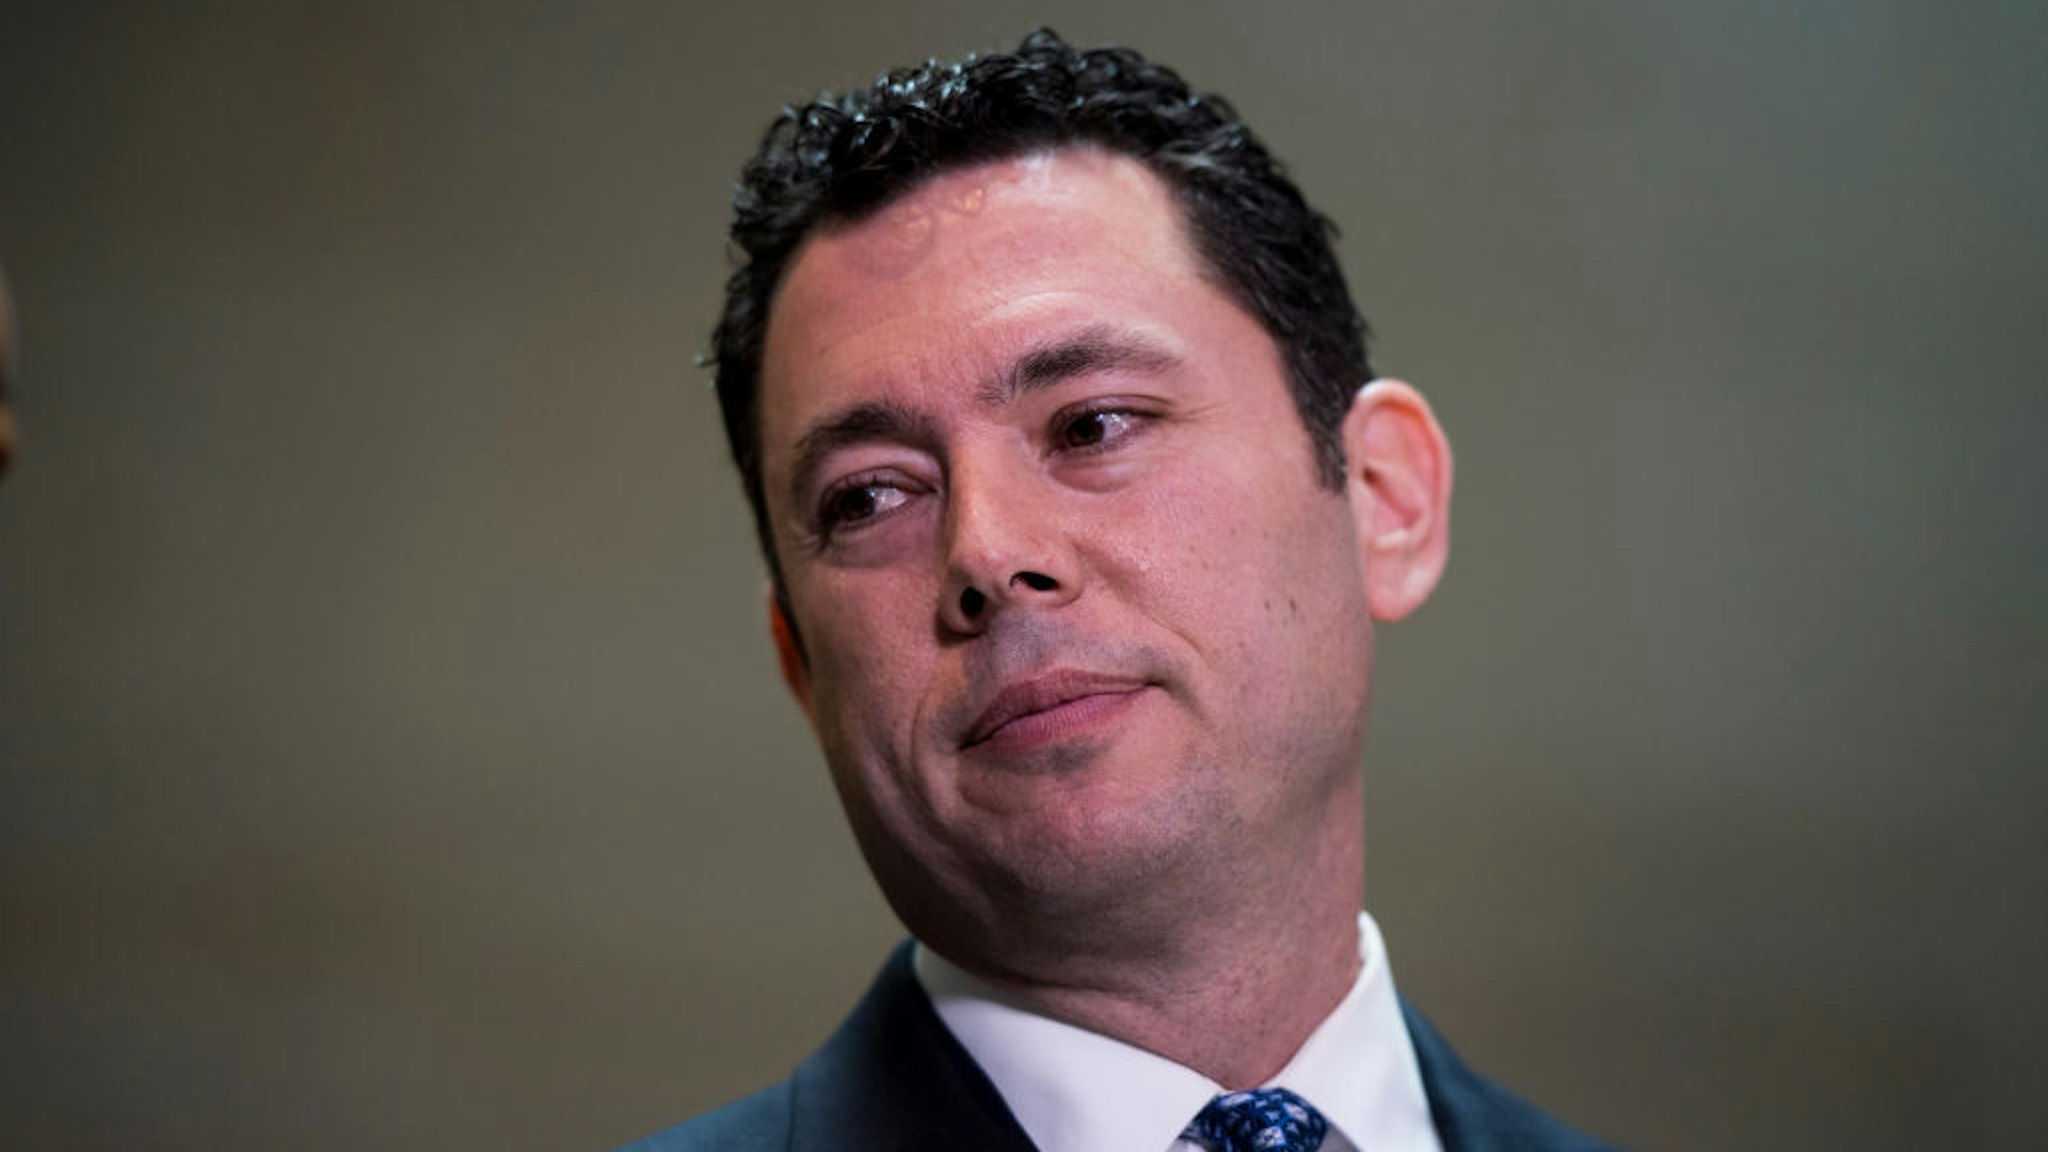 UNITED STATES - APRIL 25: House Oversight Chairman Jason Chaffetz, R-Utah, speaks during a press conference after a classified meeting of the committee in which they reviewed documents related to former national security adviser Michael Flynn in the Capitol on Tuesday, April 25, 2017. (Photo By Bill Clark/CQ Roll Call)